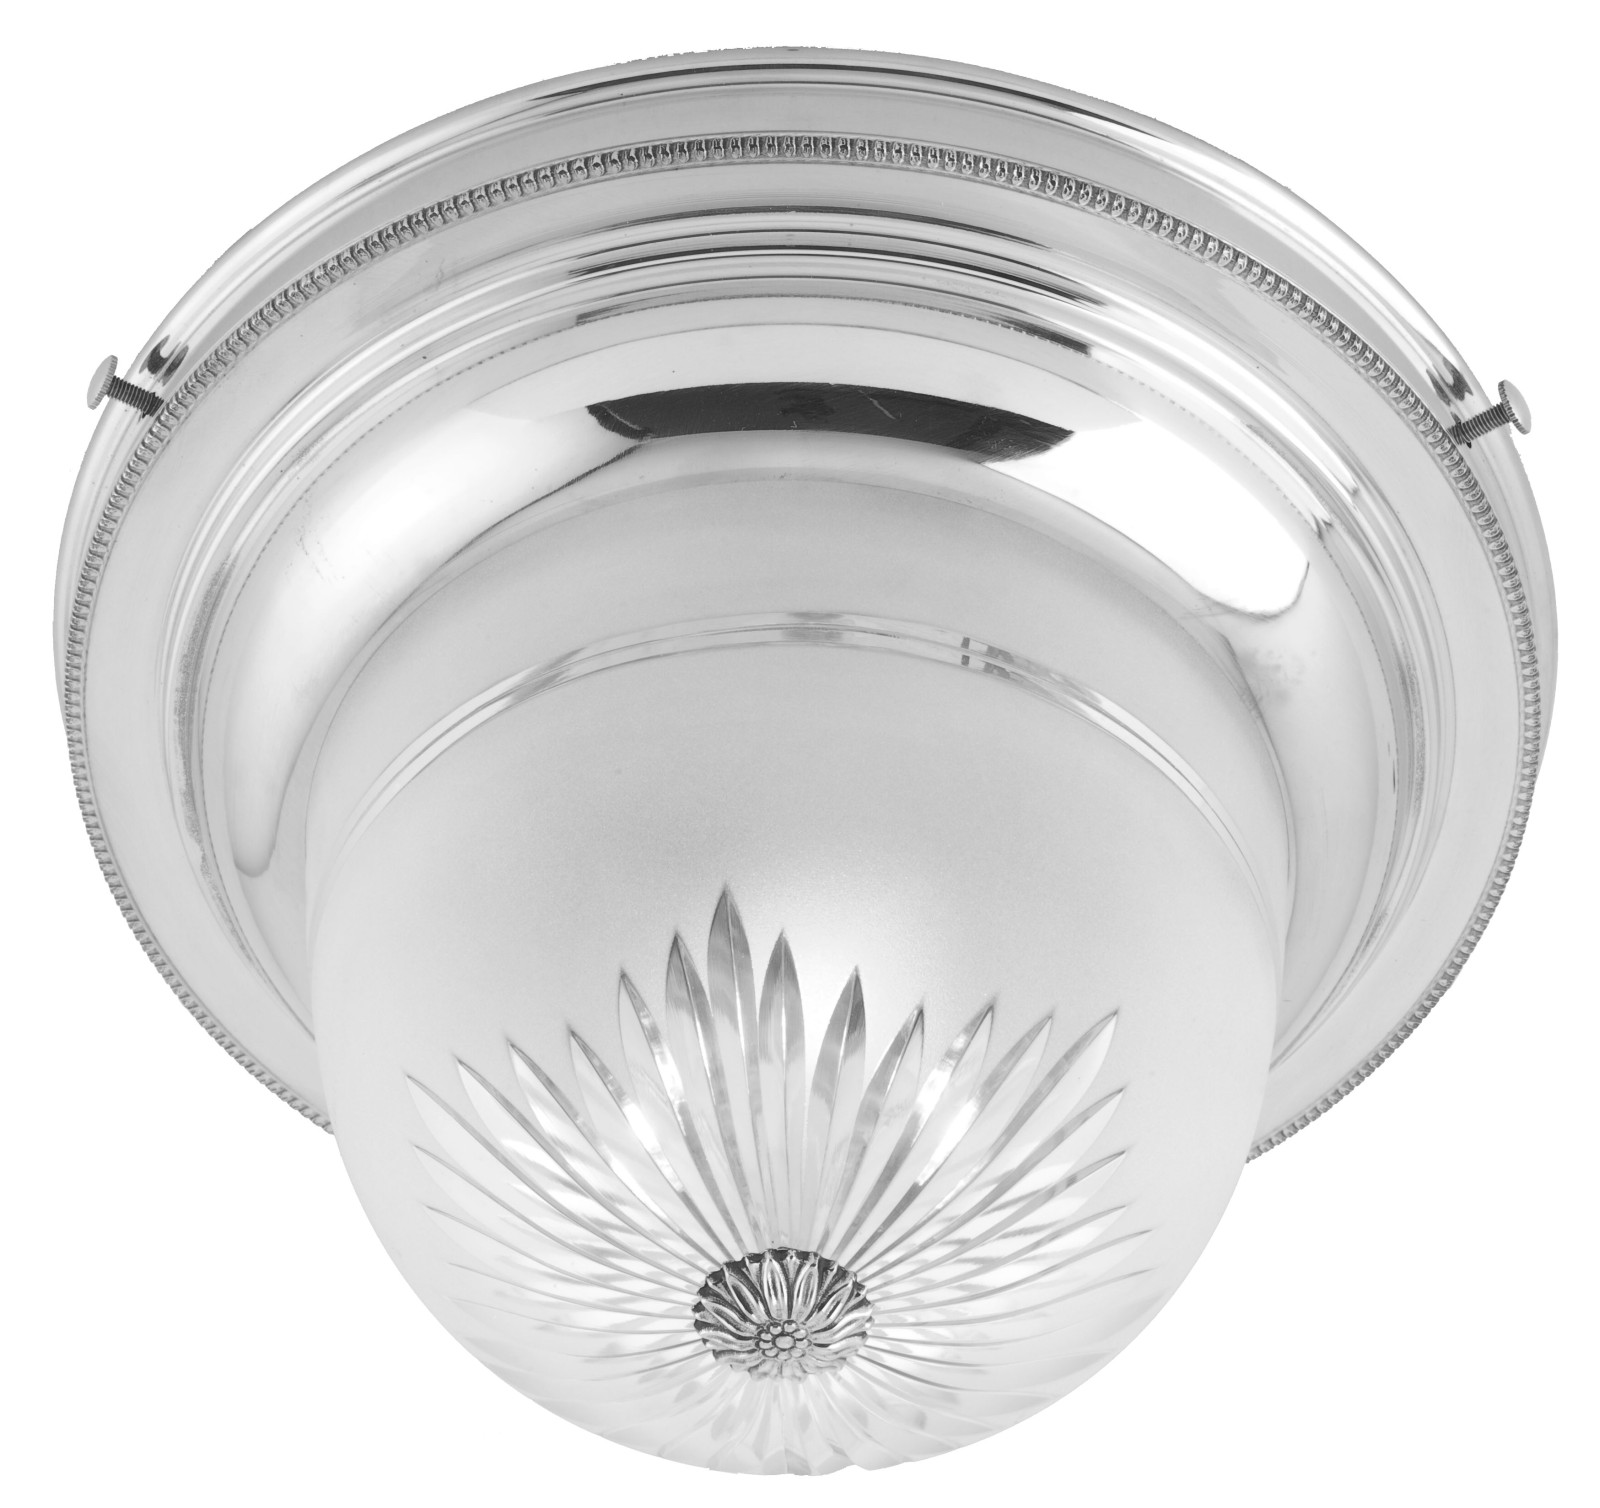 Ceiling light with sandblasted and beveled glass - Celling light - Lighting  - Products - Riccardo Barthel